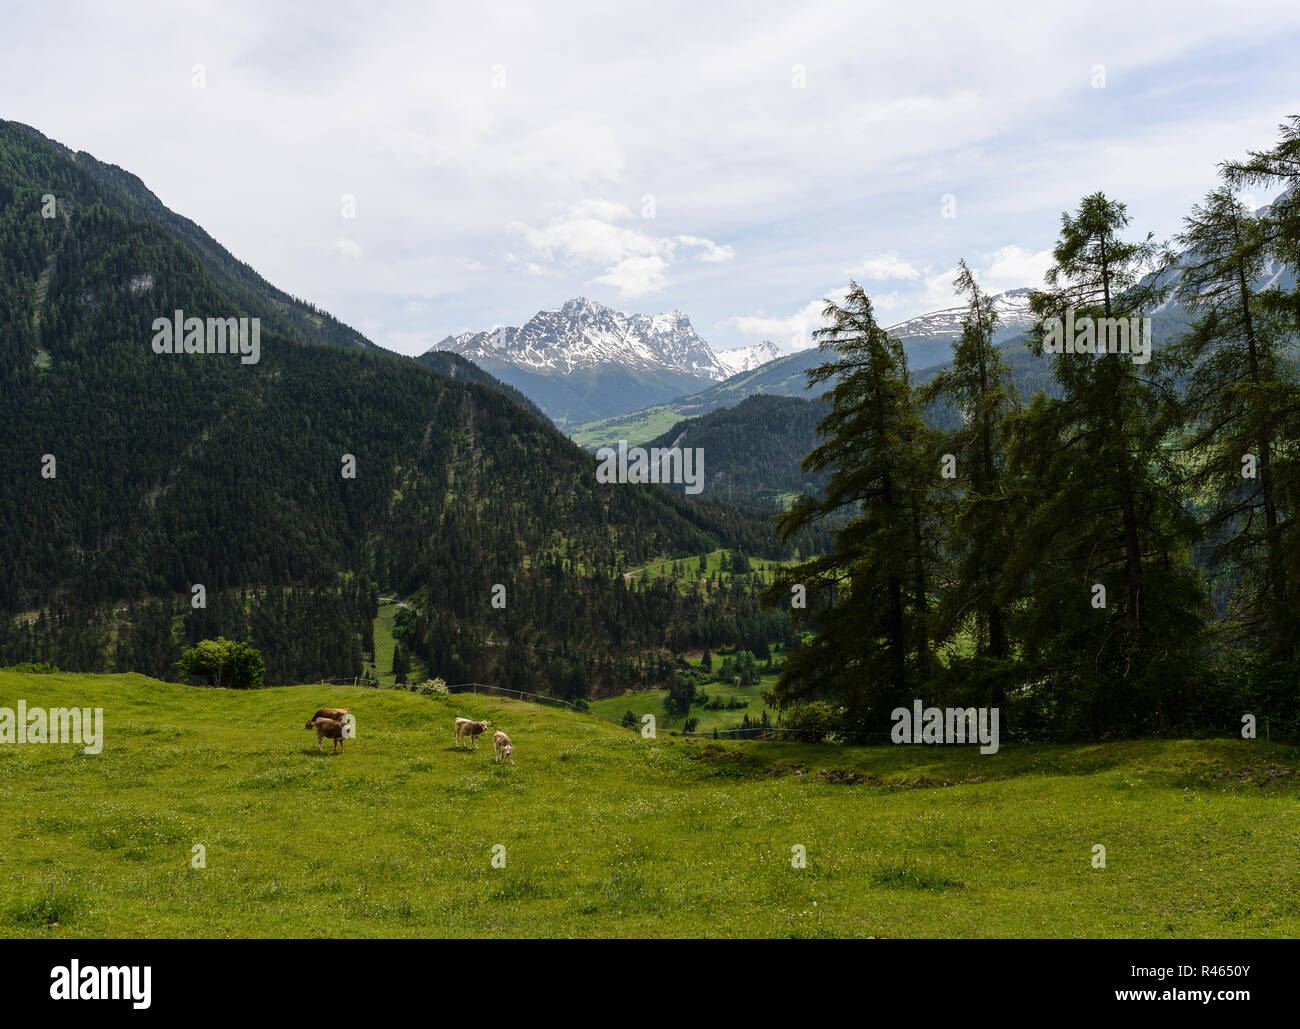 Mountain view with cows on a meadow in Swiss Alps Stock Photo